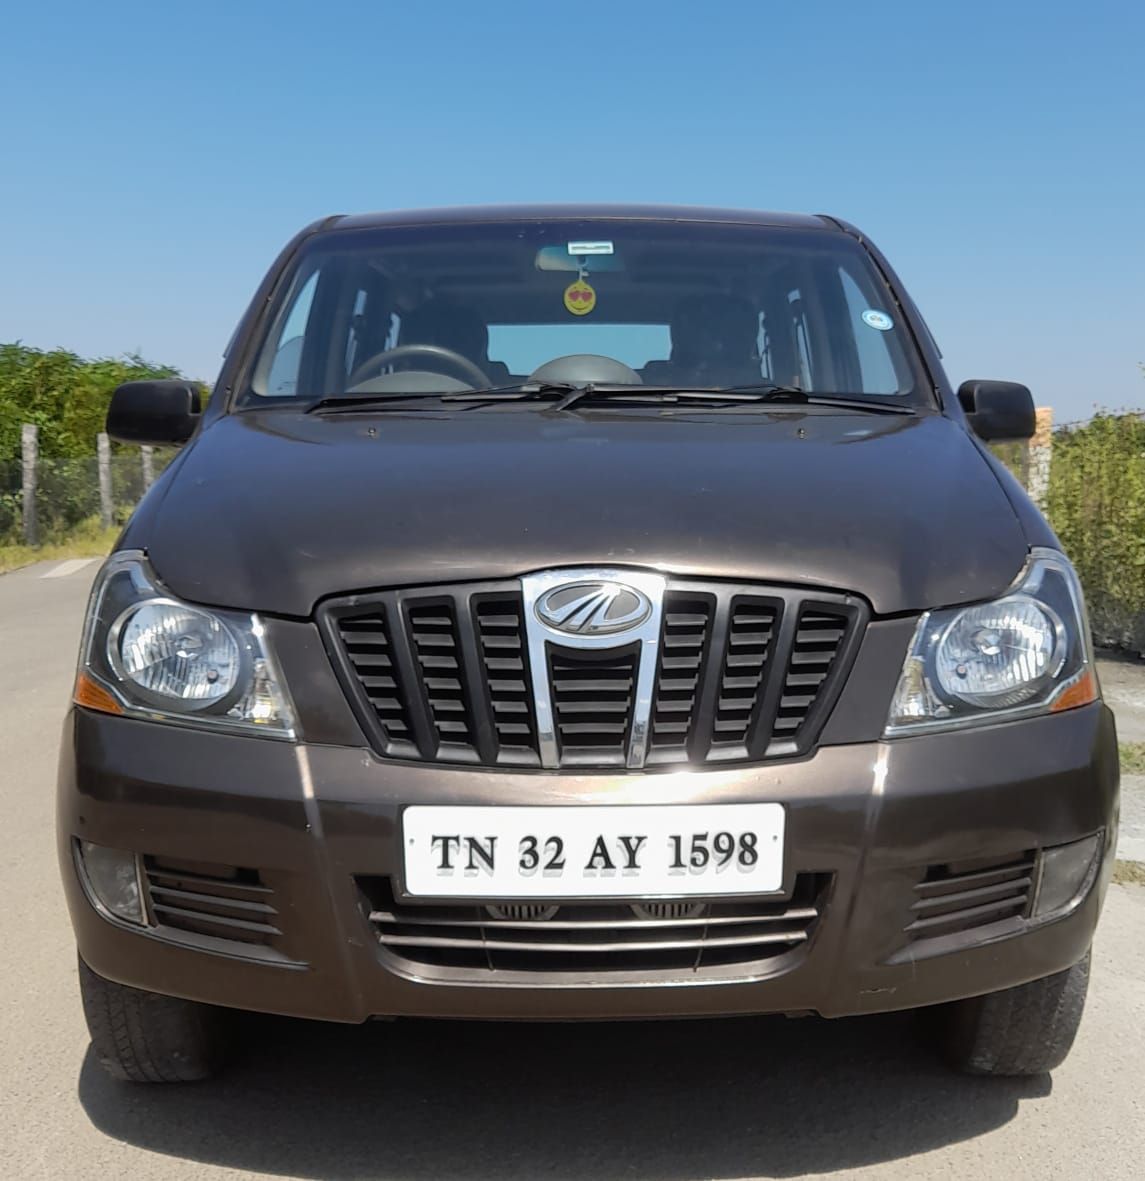 4768-for-sale-Mahindra-Xylo-Diesel-Second-Owner-2011-TN-registered-rs-425000